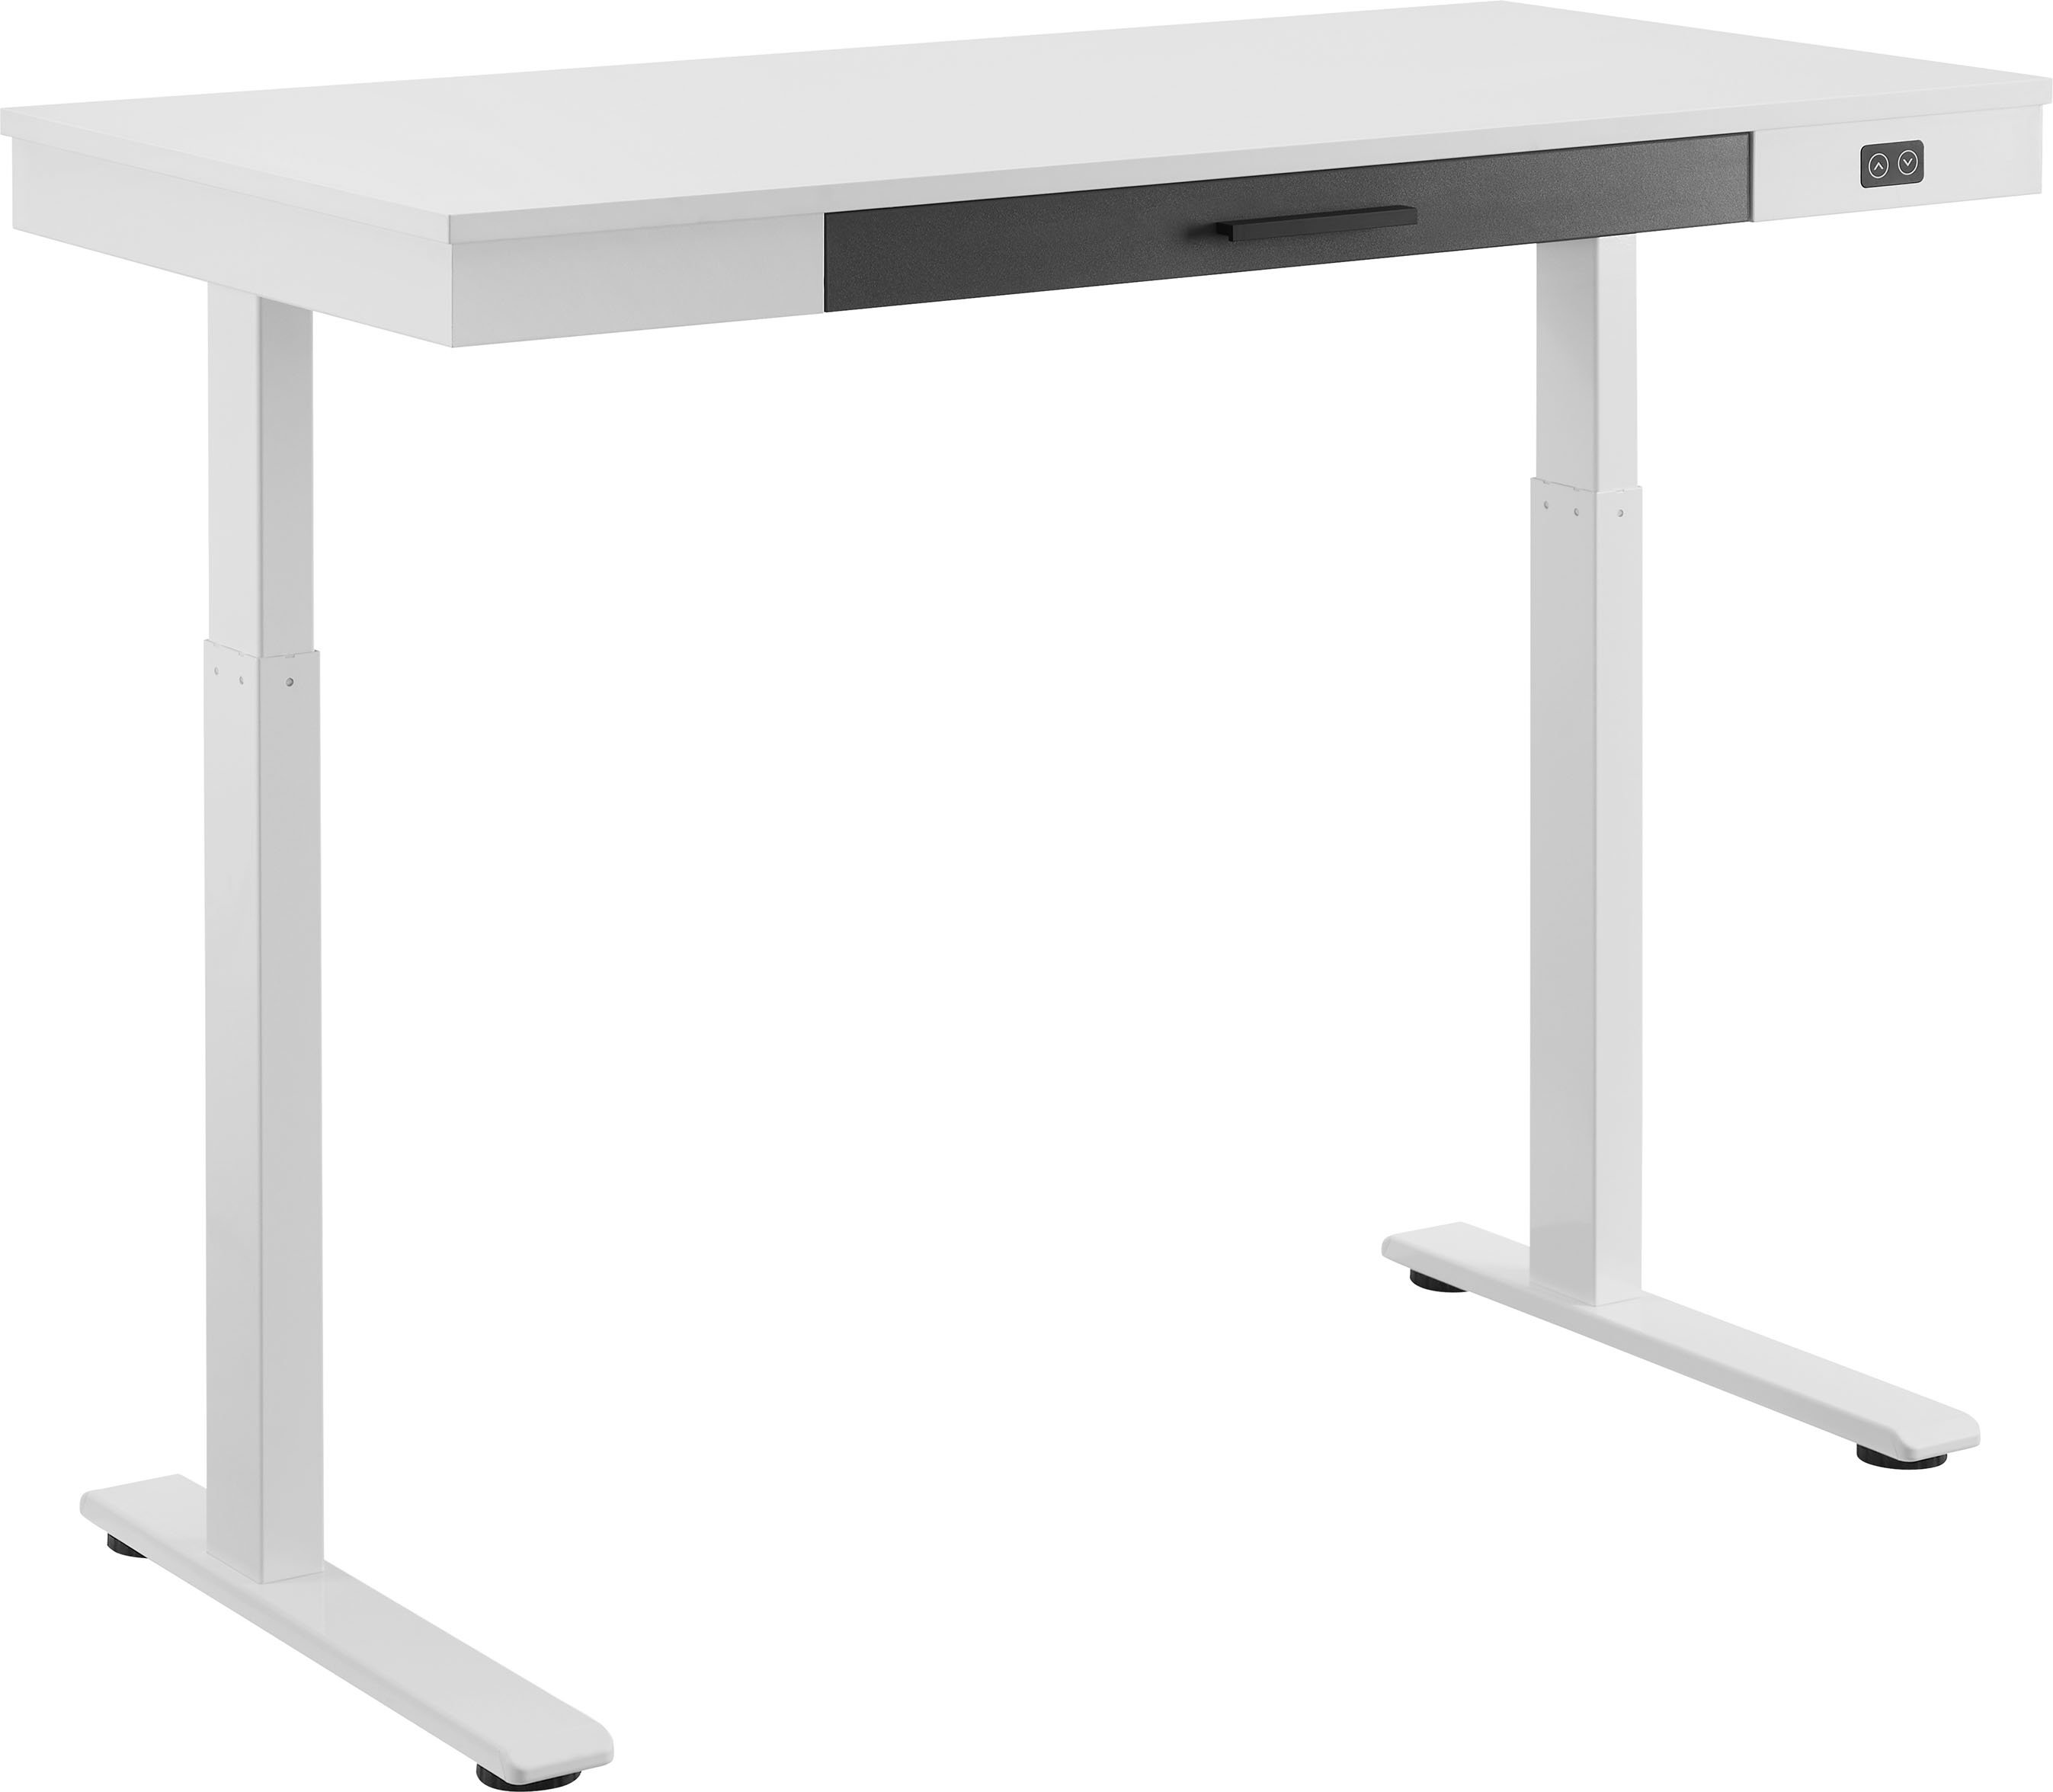 Angle View: Victor Technology VCTDCX710 High Rise Height Adjustable Standing Desk, Black & Gray